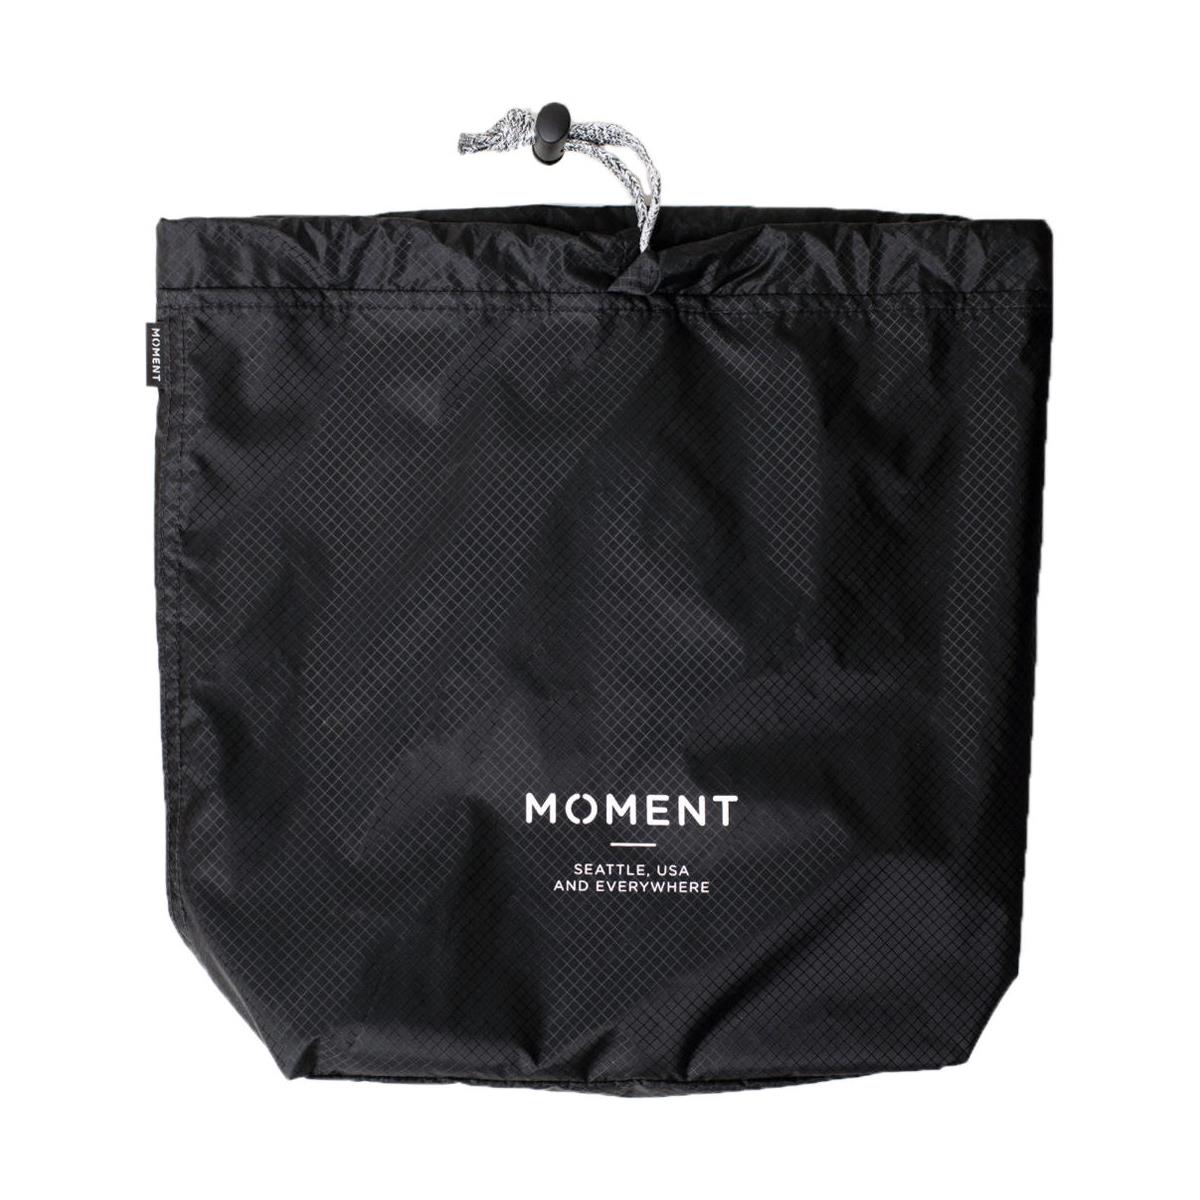 Image of Moment Snackpack Stuff Sack